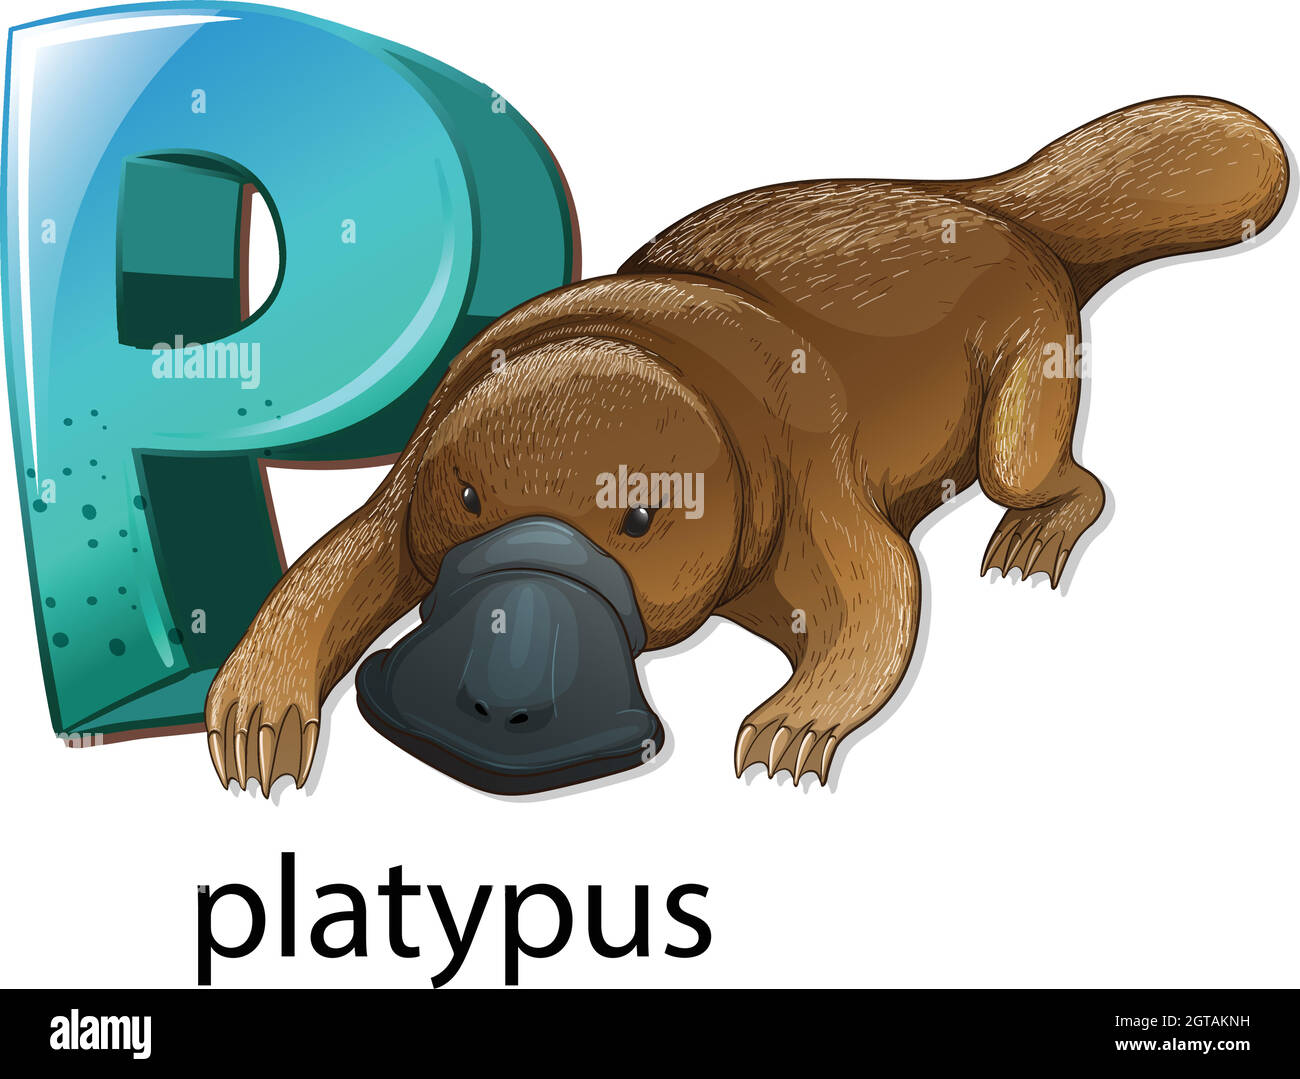 A letter P for platypus Stock Vector